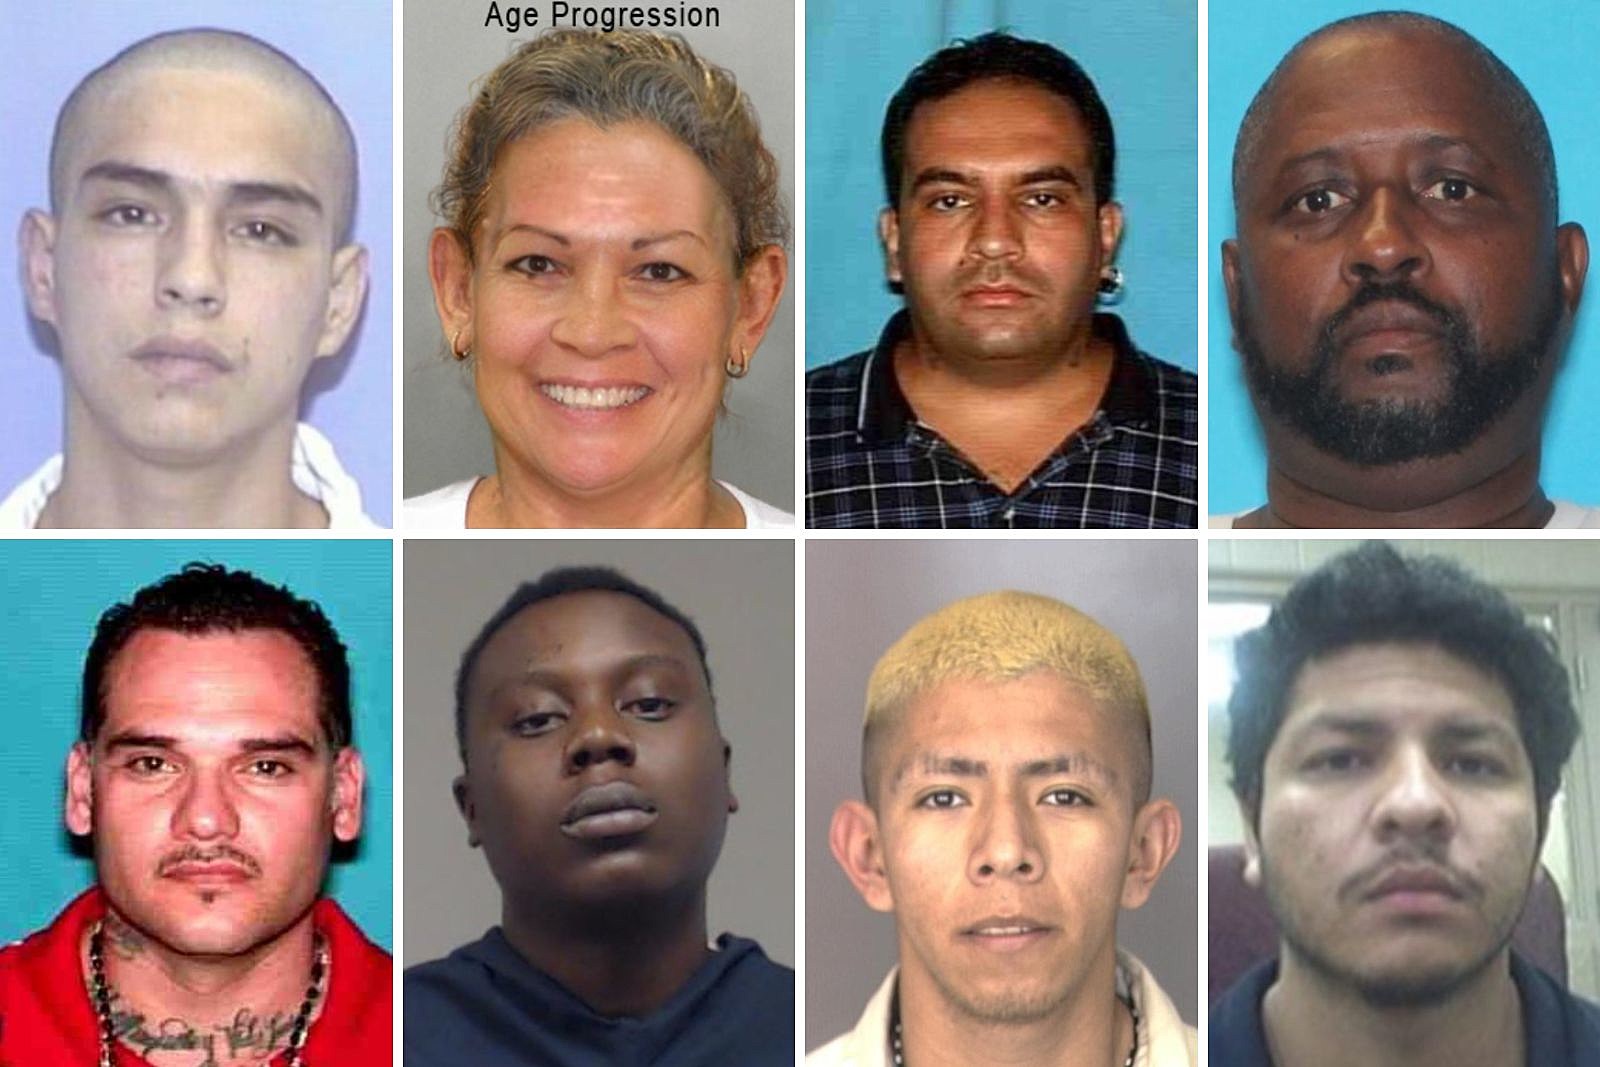 Dps One Of Texas 10 Most Wanted Sex Offenders Has Ties To Midland